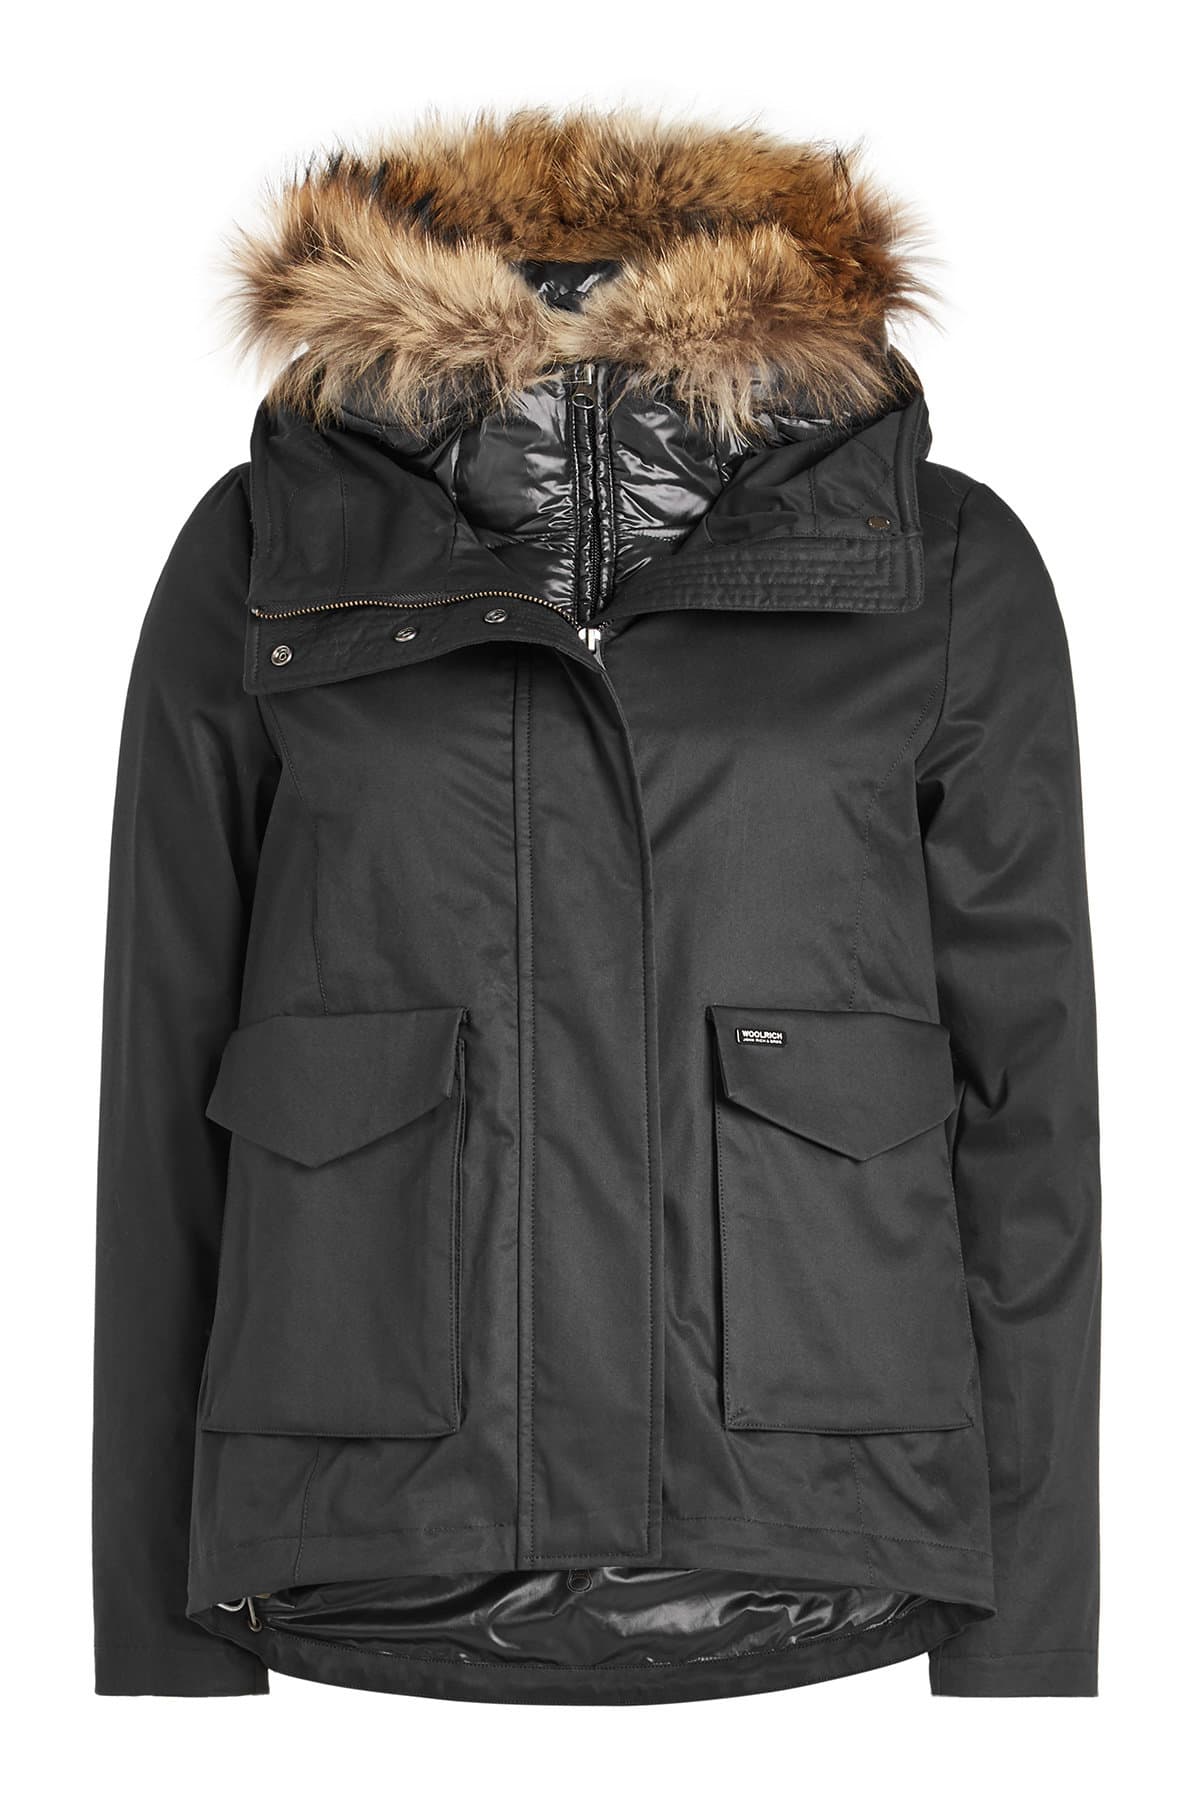 Woolrich - 3 in 1 Military Down Jacket with Fur-Trimmed Hood